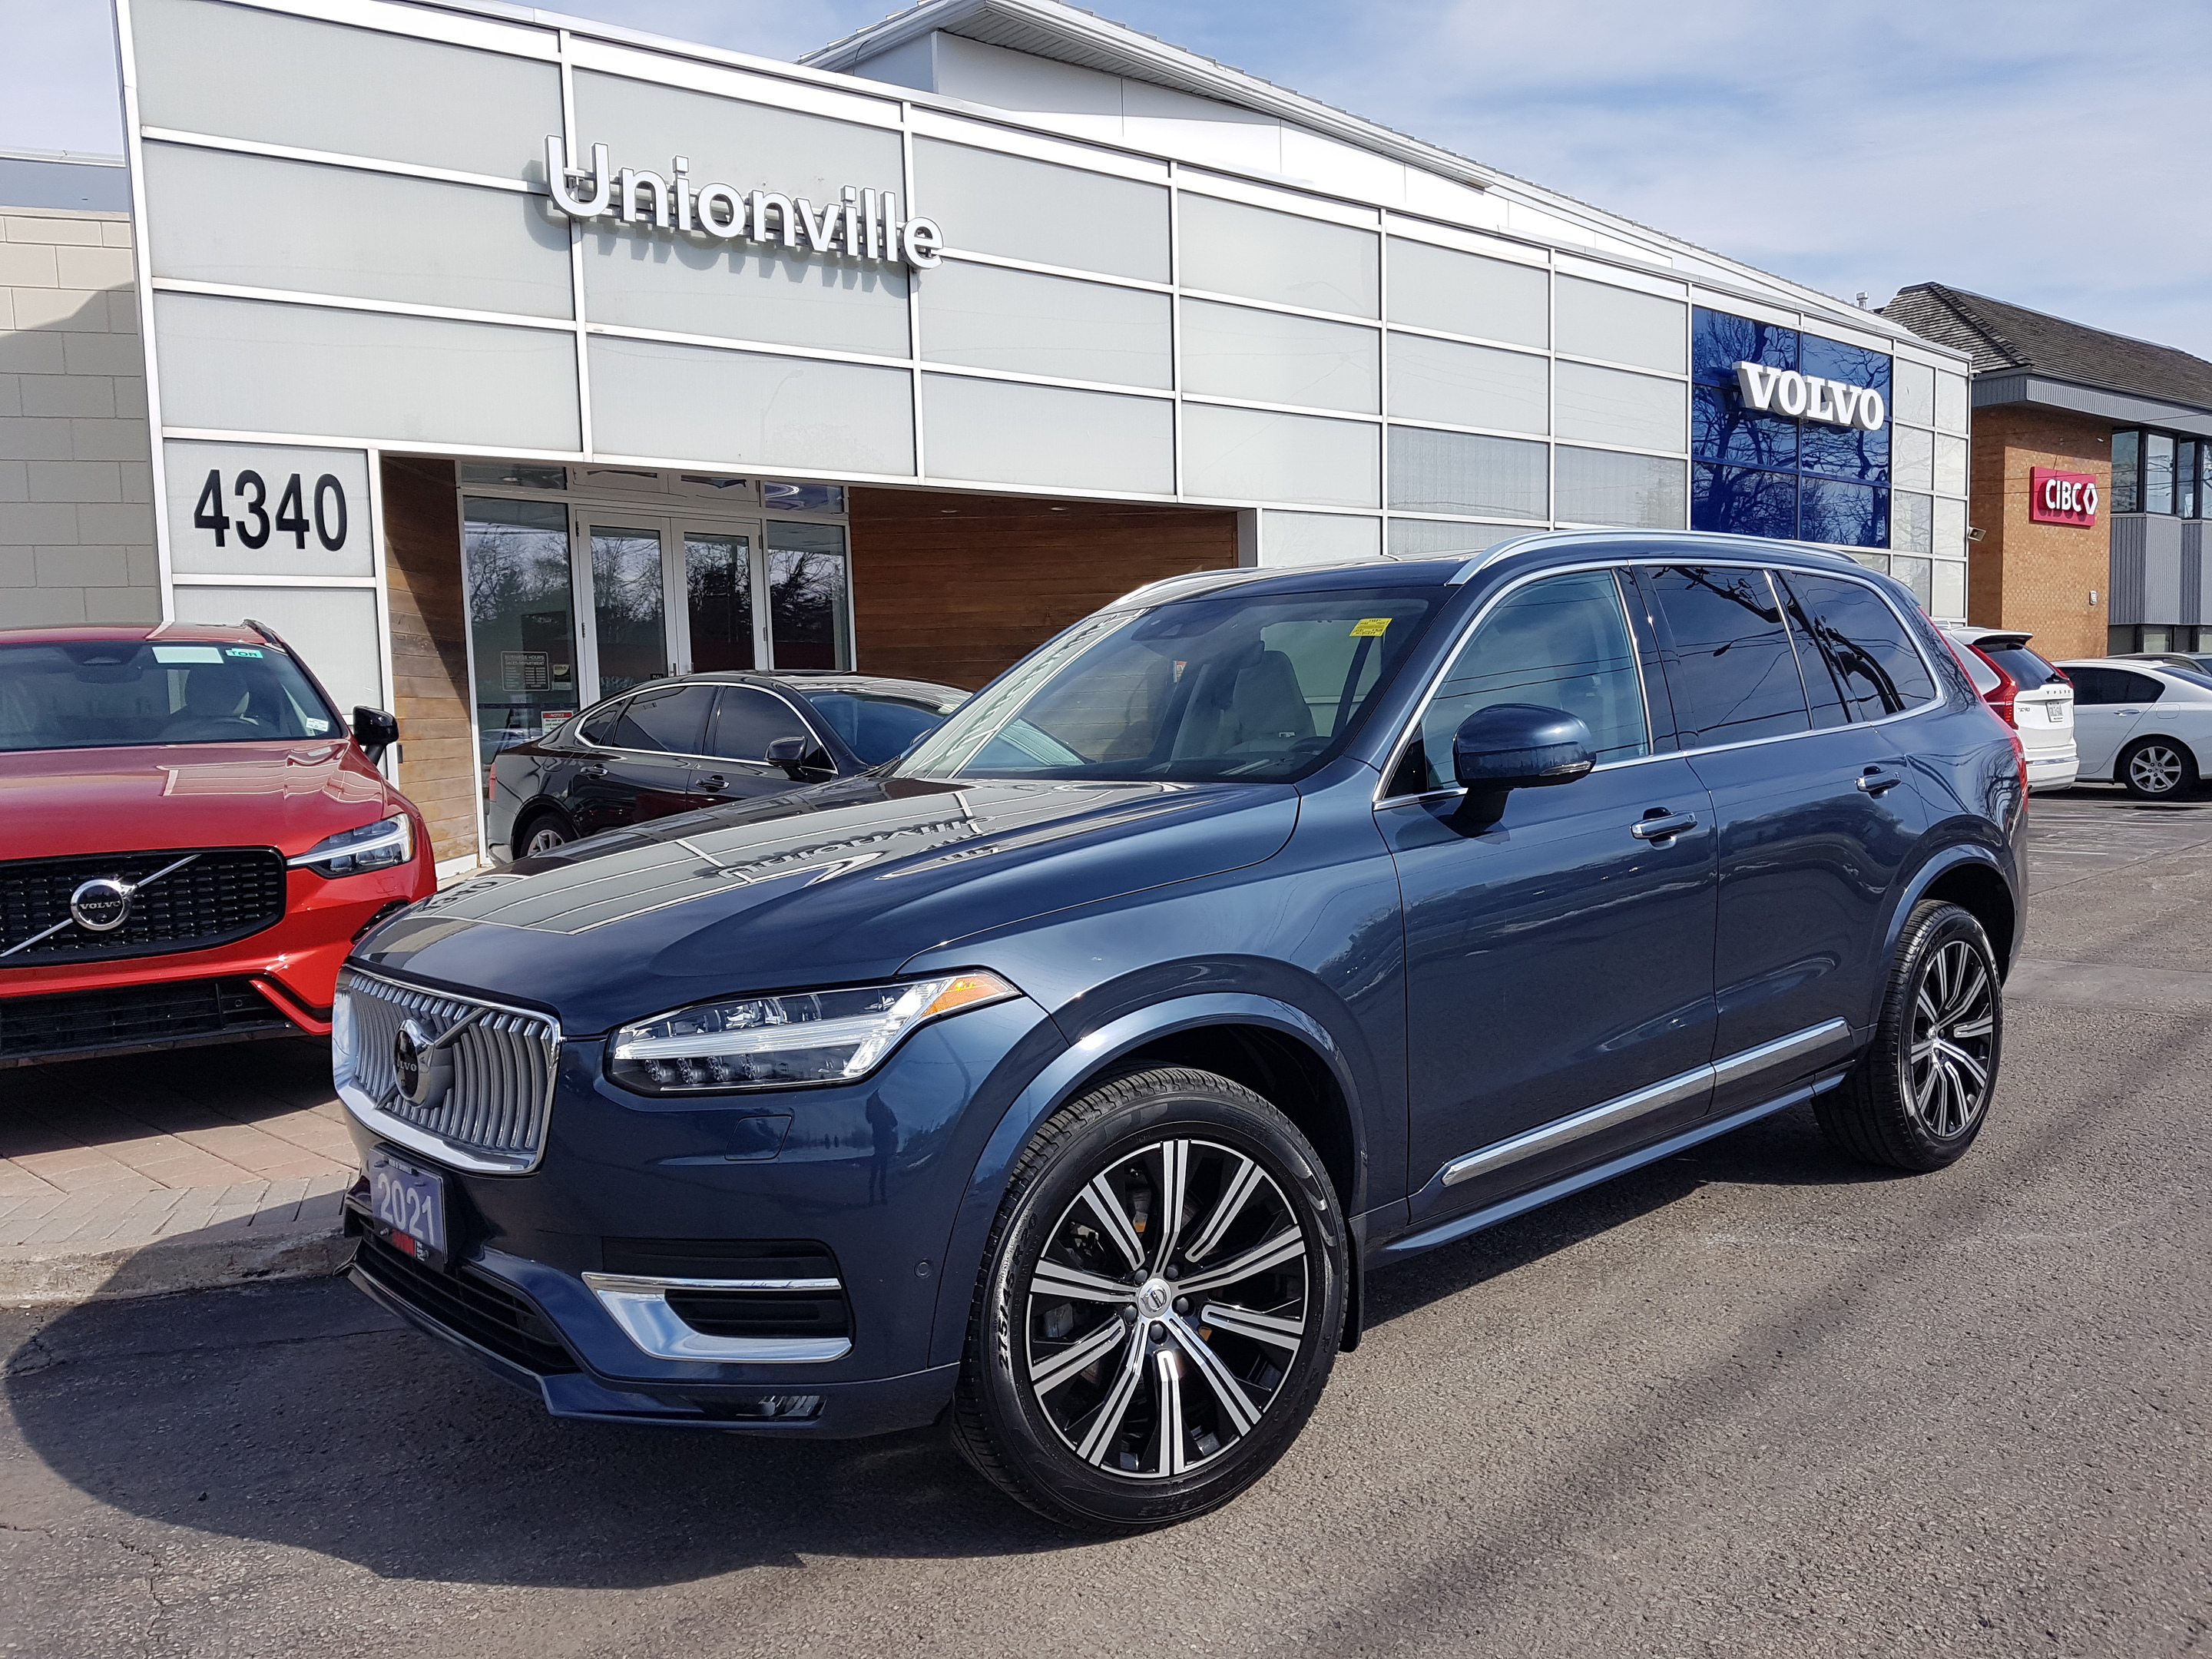 2021 Volvo XC90 T6 AWD Inscription (7-Seat) |CPO|FINANCE FROM 3.24